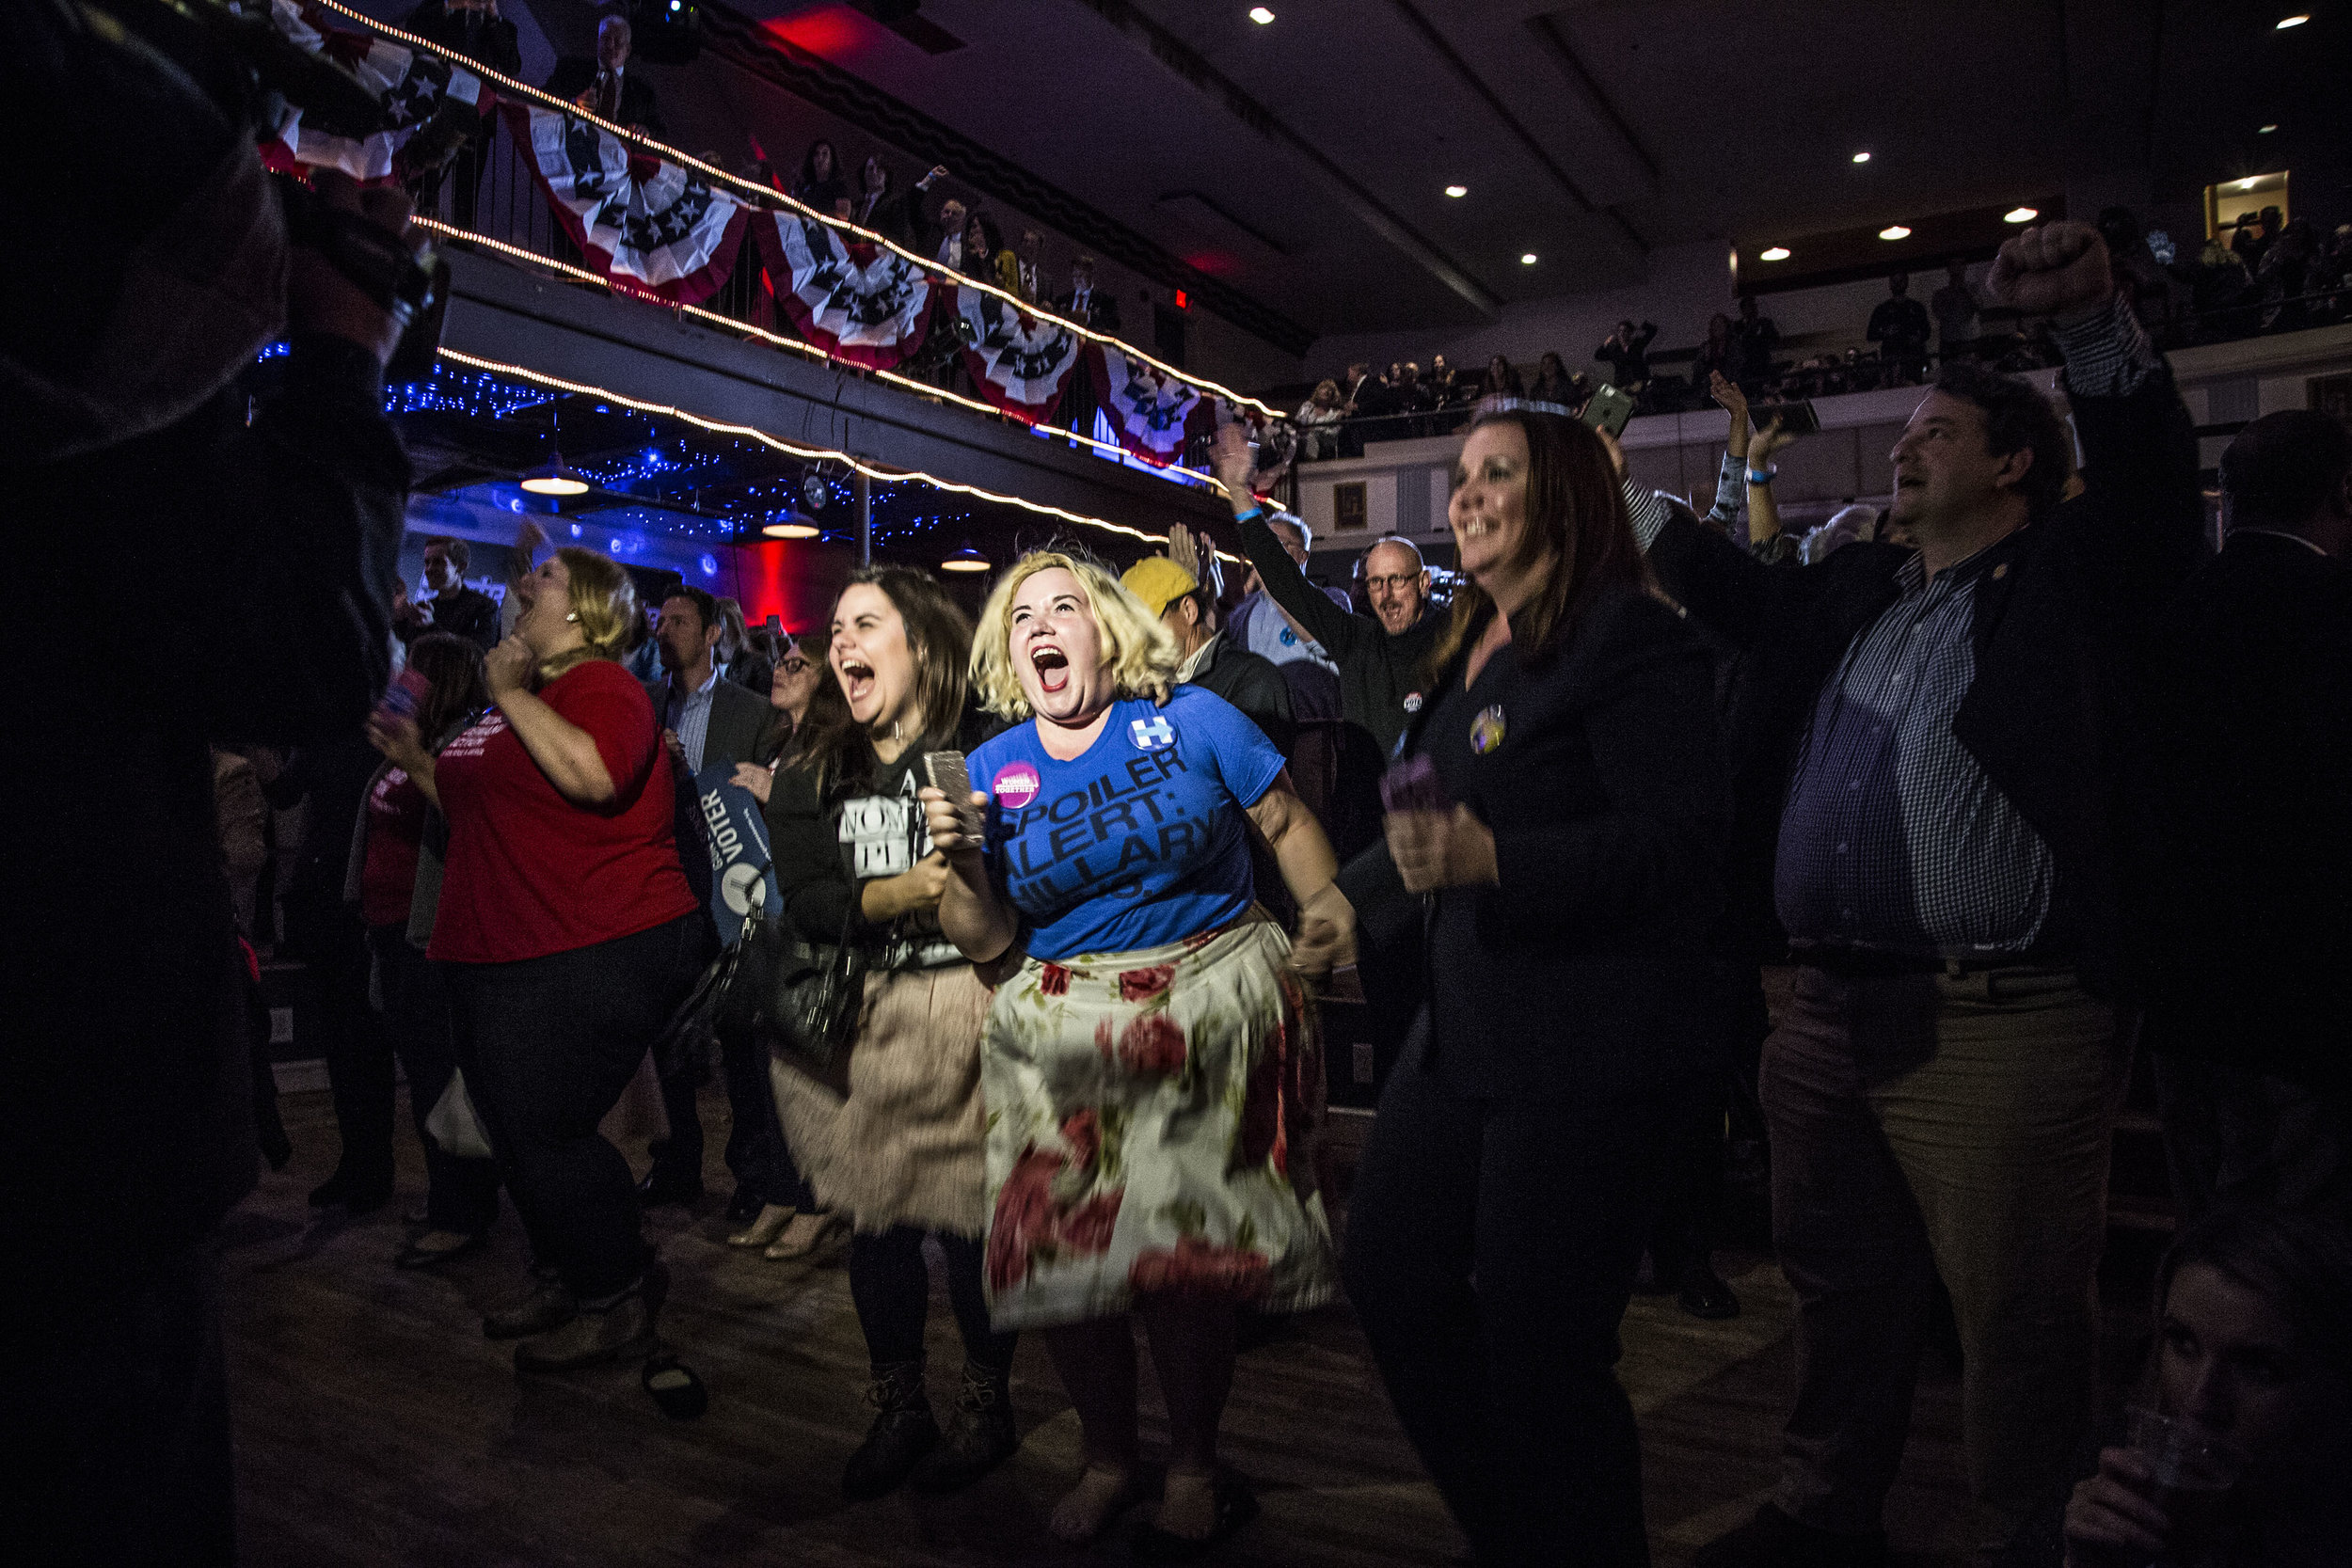   Hillary Clinton supporters react to early election results during Governor Terry McAuliffe's election night watch party in Falls Church, Va.&nbsp;  